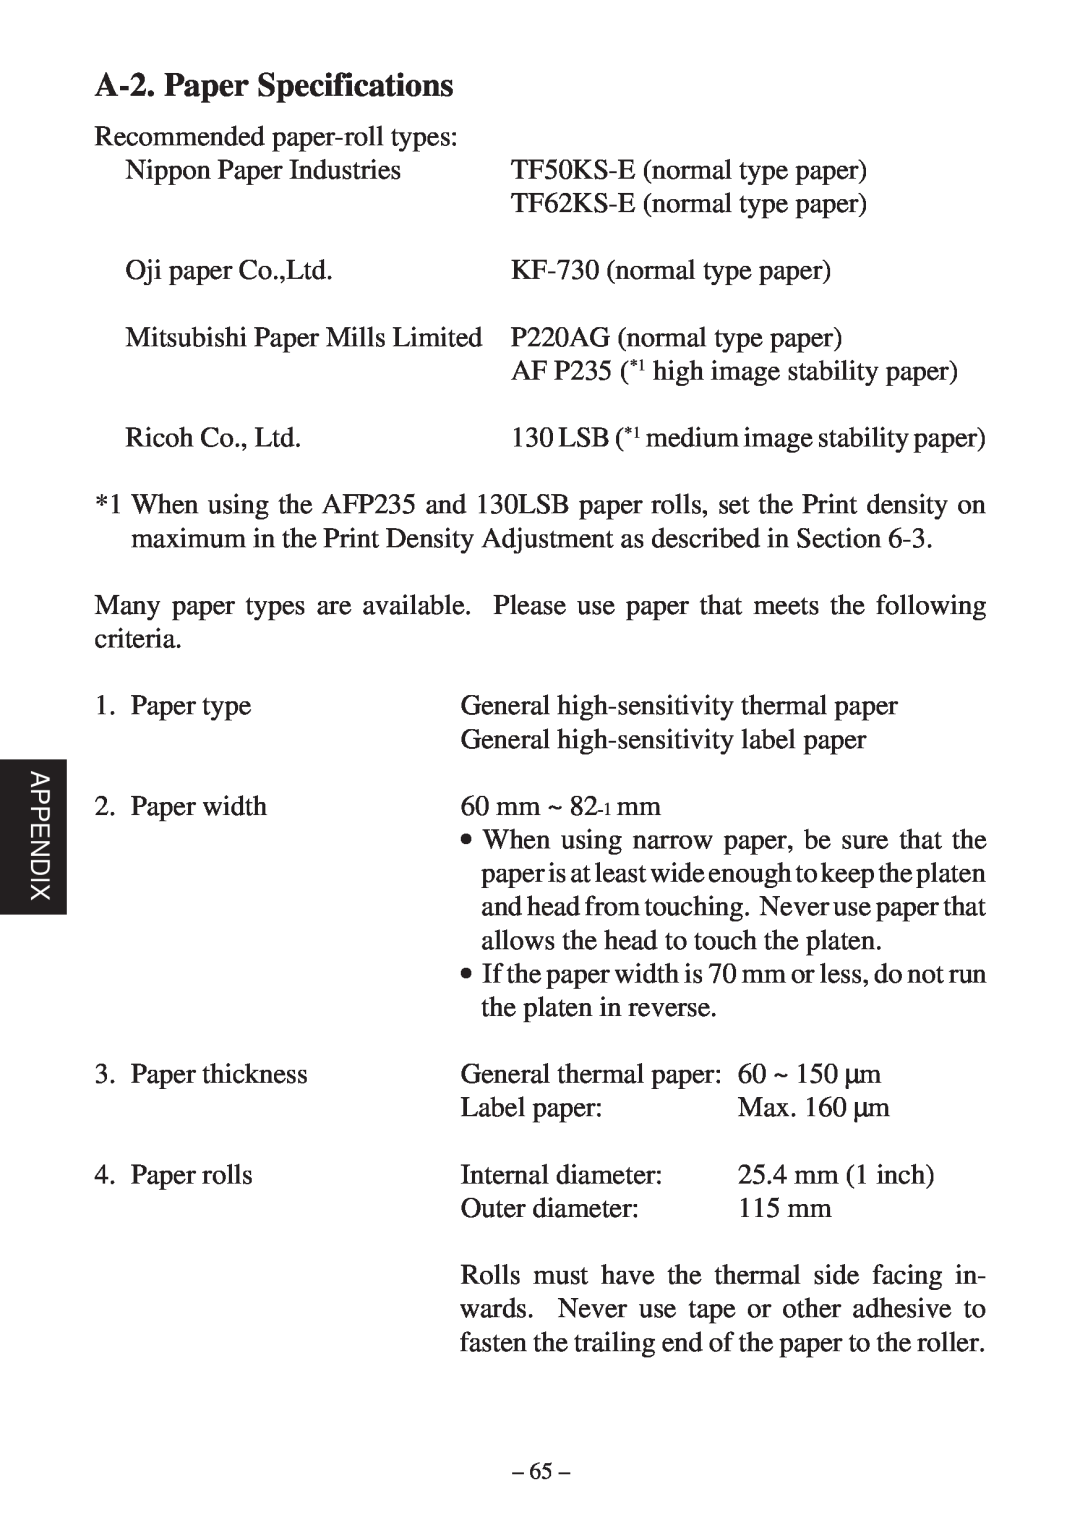 Star Micronics TSP400Z Series user manual A-2. Paper Specifications 